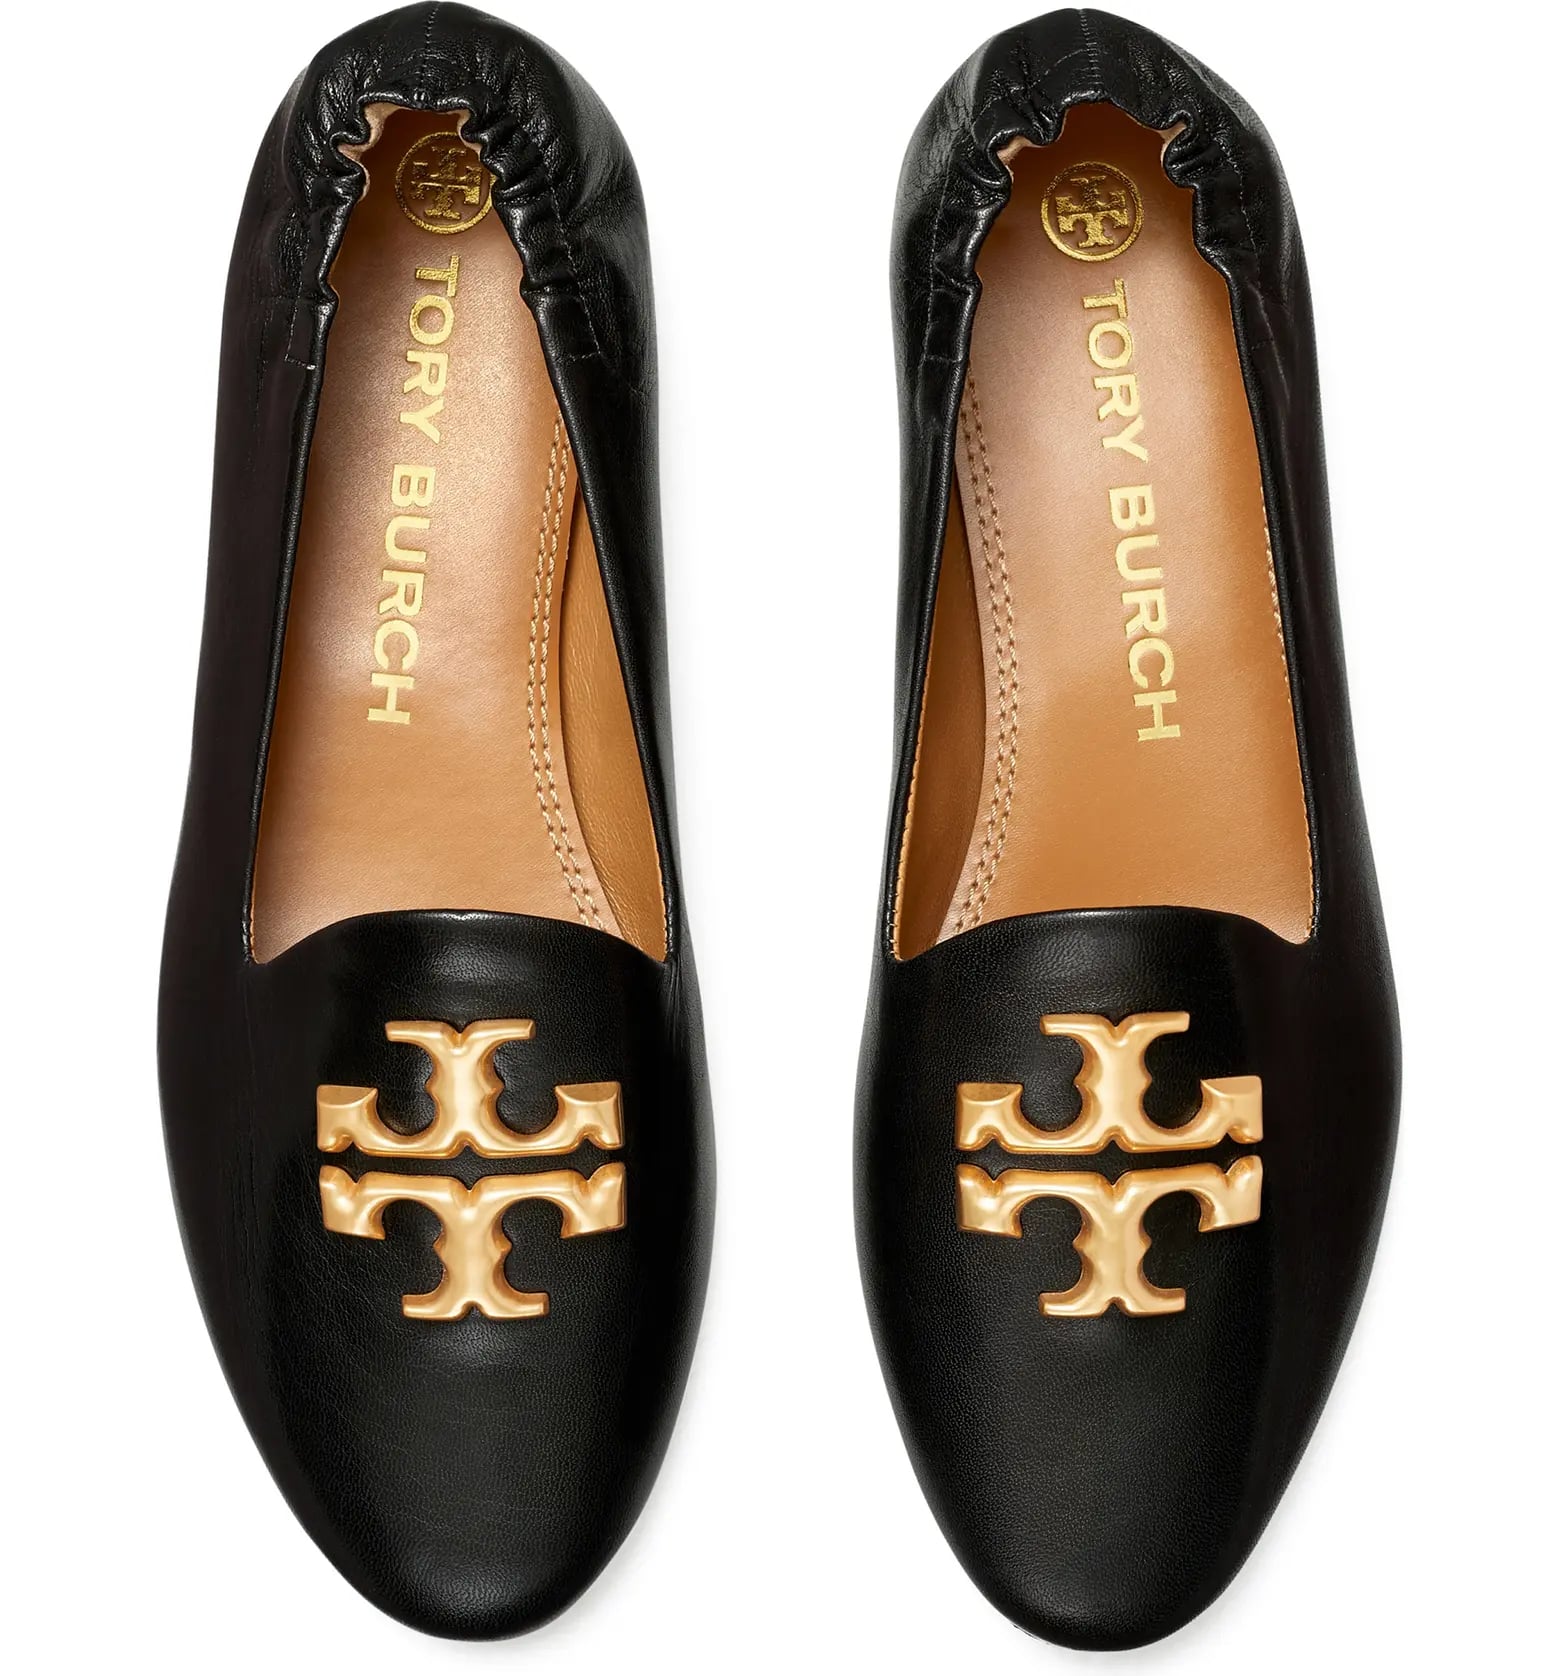 Best Dressy Black Flats: Tory Burch Eleanor Leather Loafers | Black Flats  Are a Timeless Essential — Stock Up on Our 18 Favorites | POPSUGAR Fashion  Photo 19